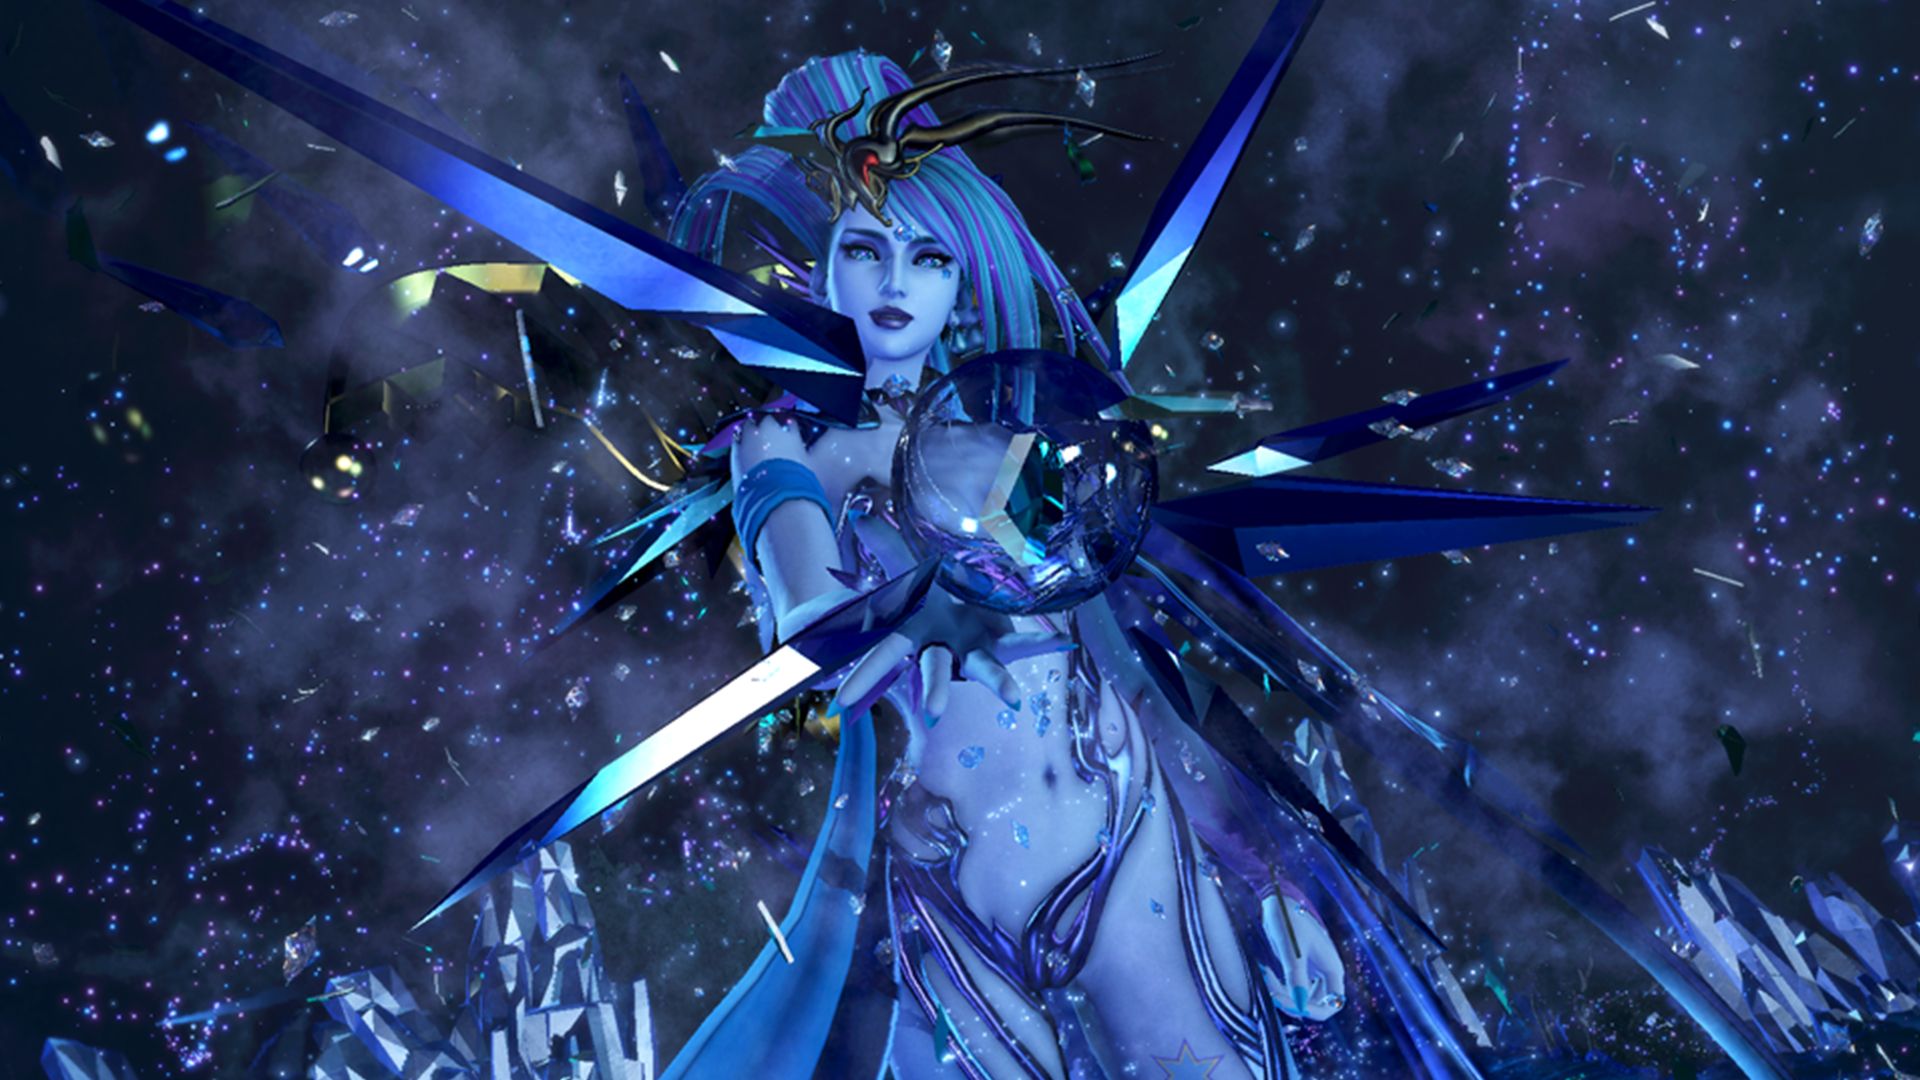 Dissidia Final Fantasy NT (PS4) Review: The Waiting Game